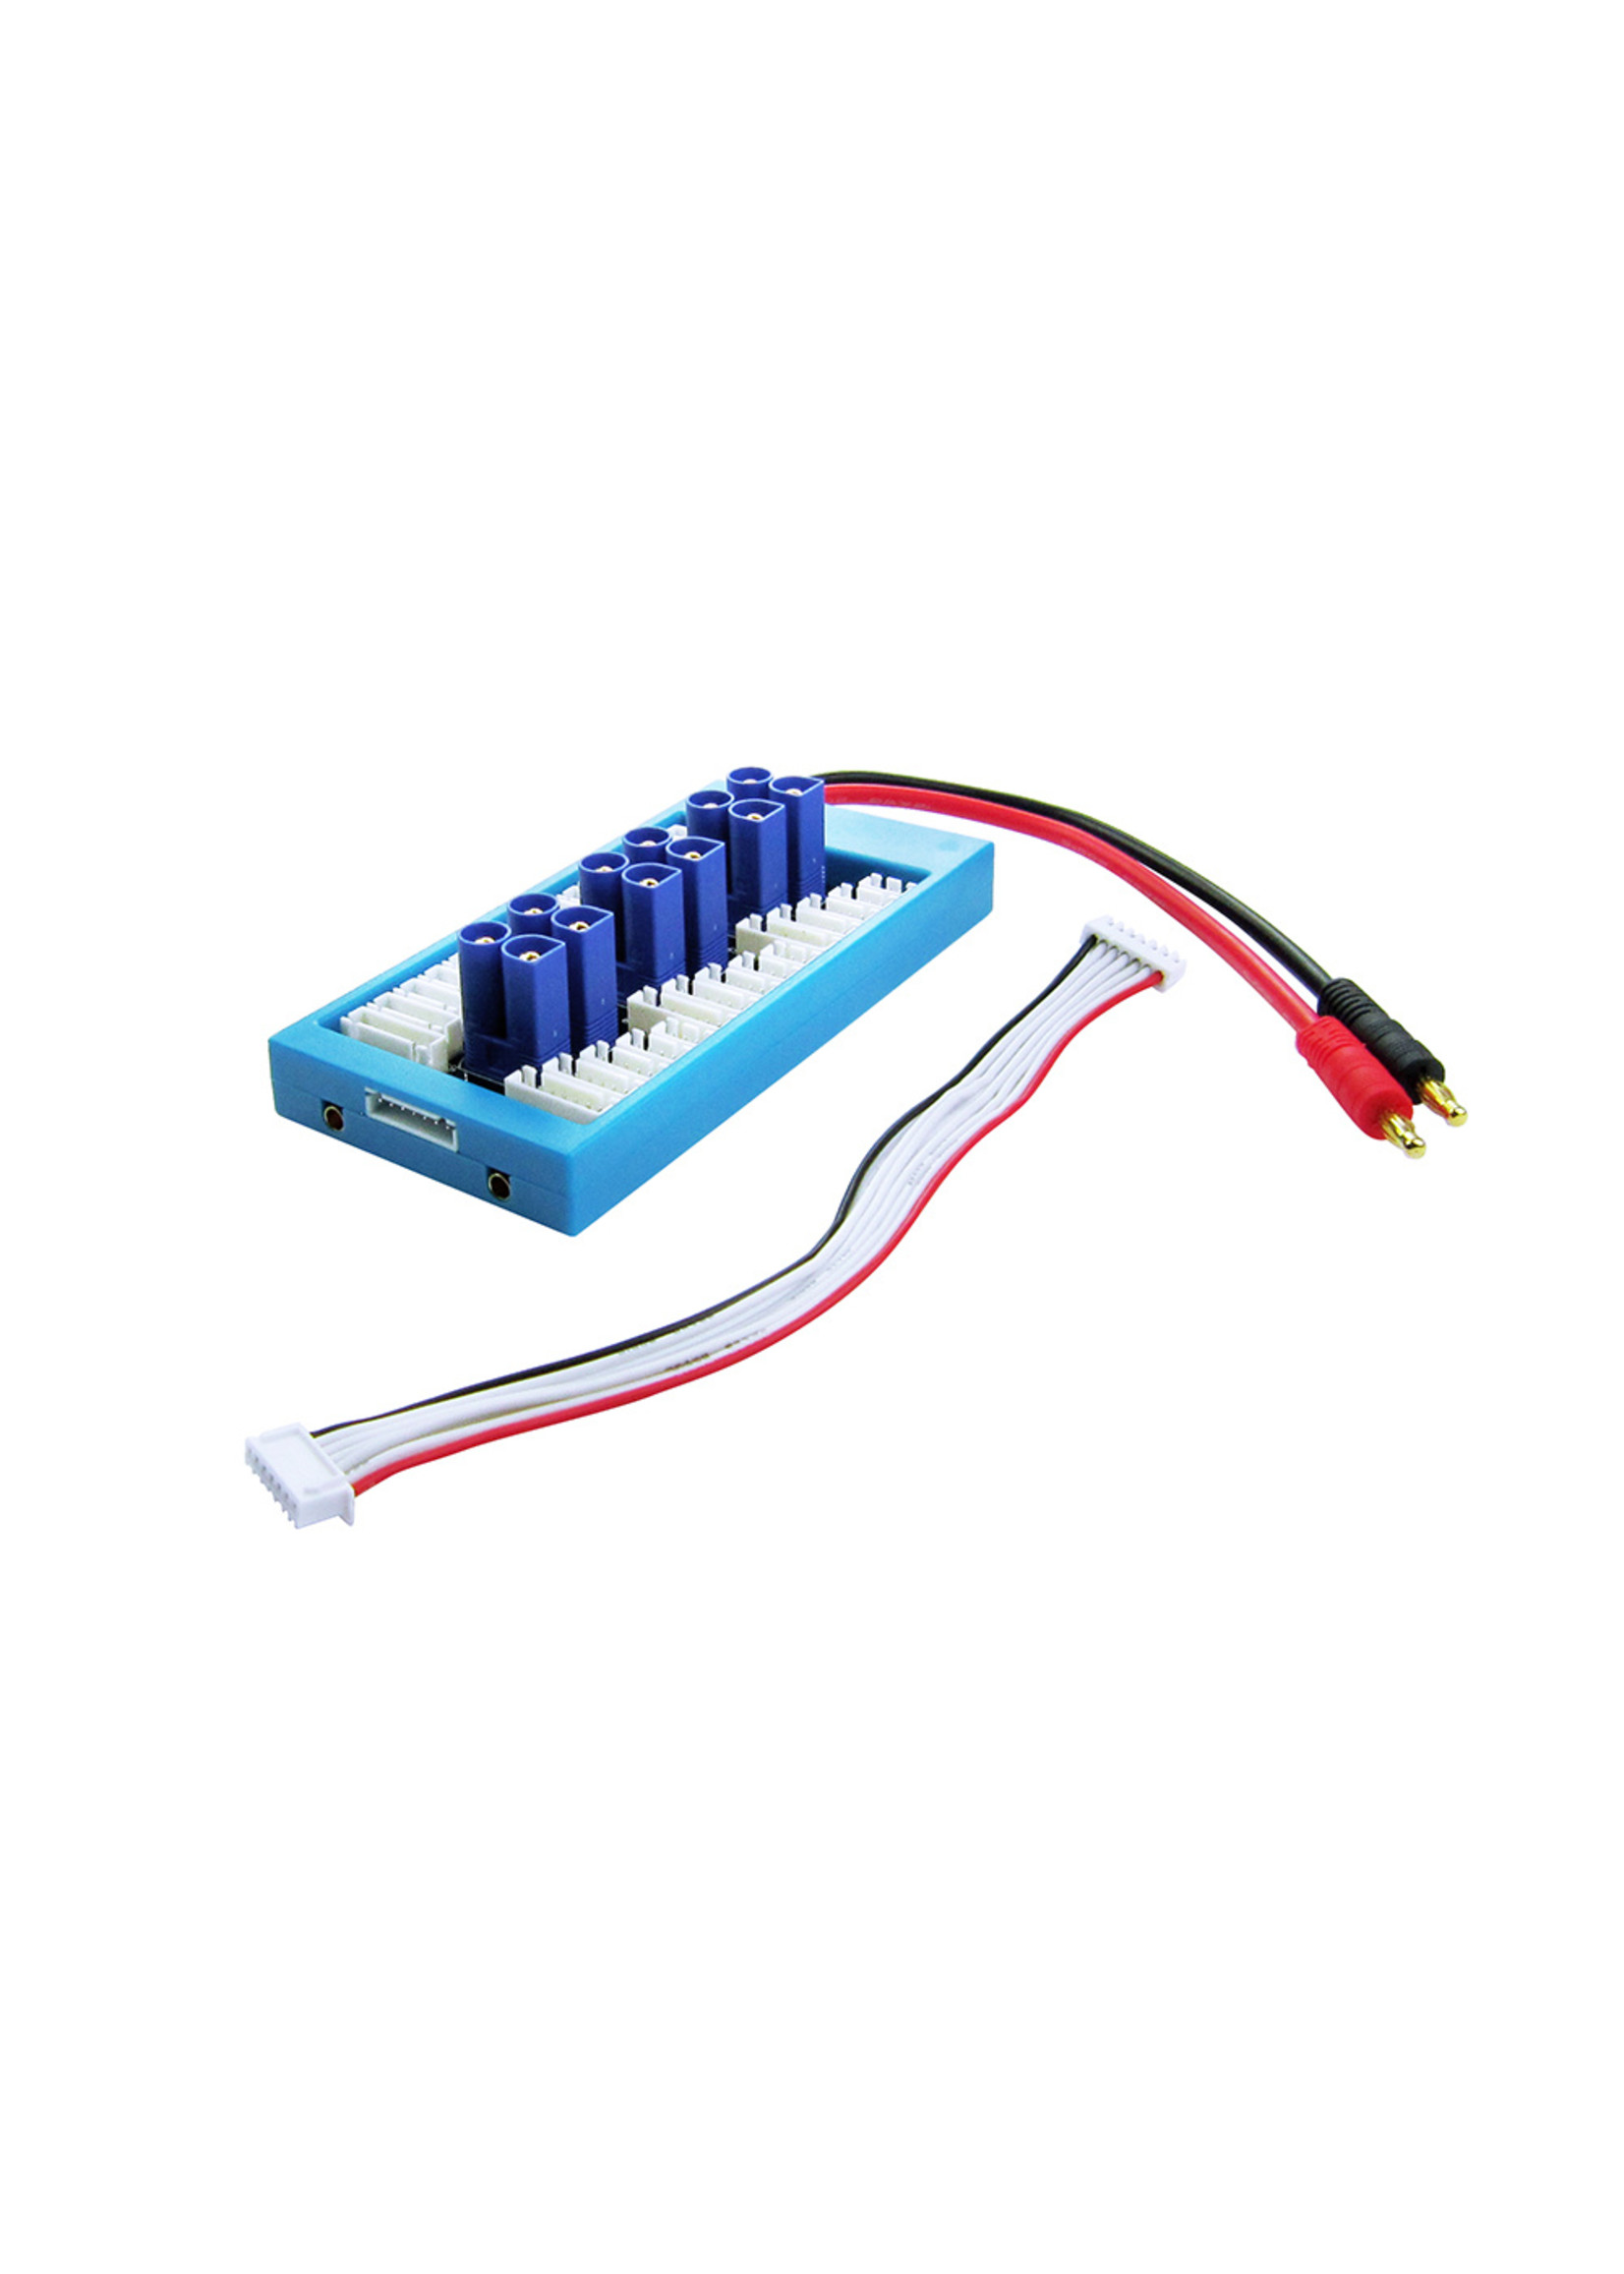 Common Sense RC CSRCPRBRD-EC5 Paraboard - Parallel Charging Board for Lipos with EC5 Connectors